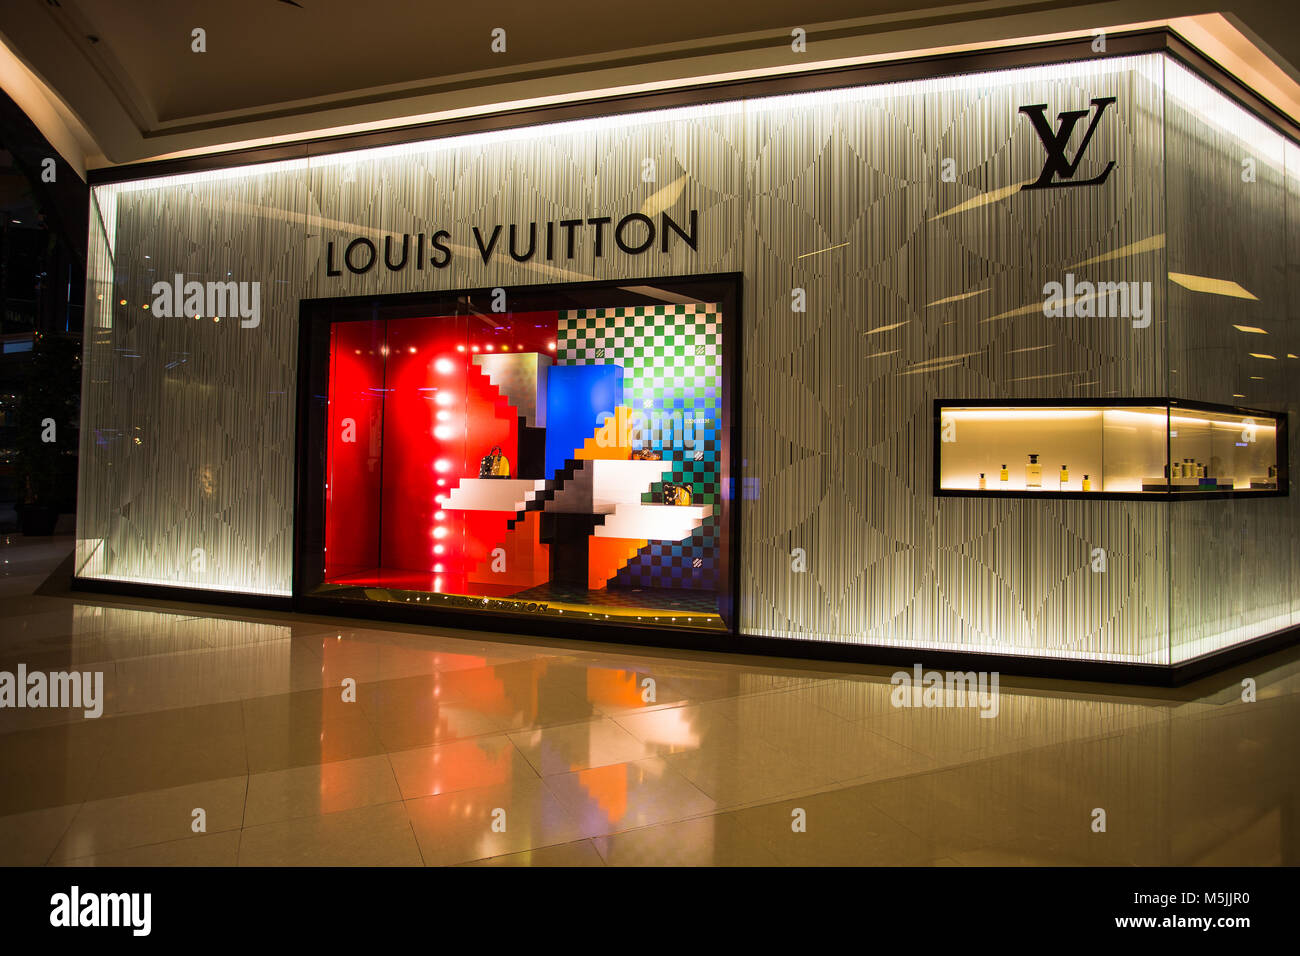 BANGKOK, THAILAND, MARCH 01, 2017 - Louis Vuitton store in Siam Stock Photo: 175586852 - Alamy